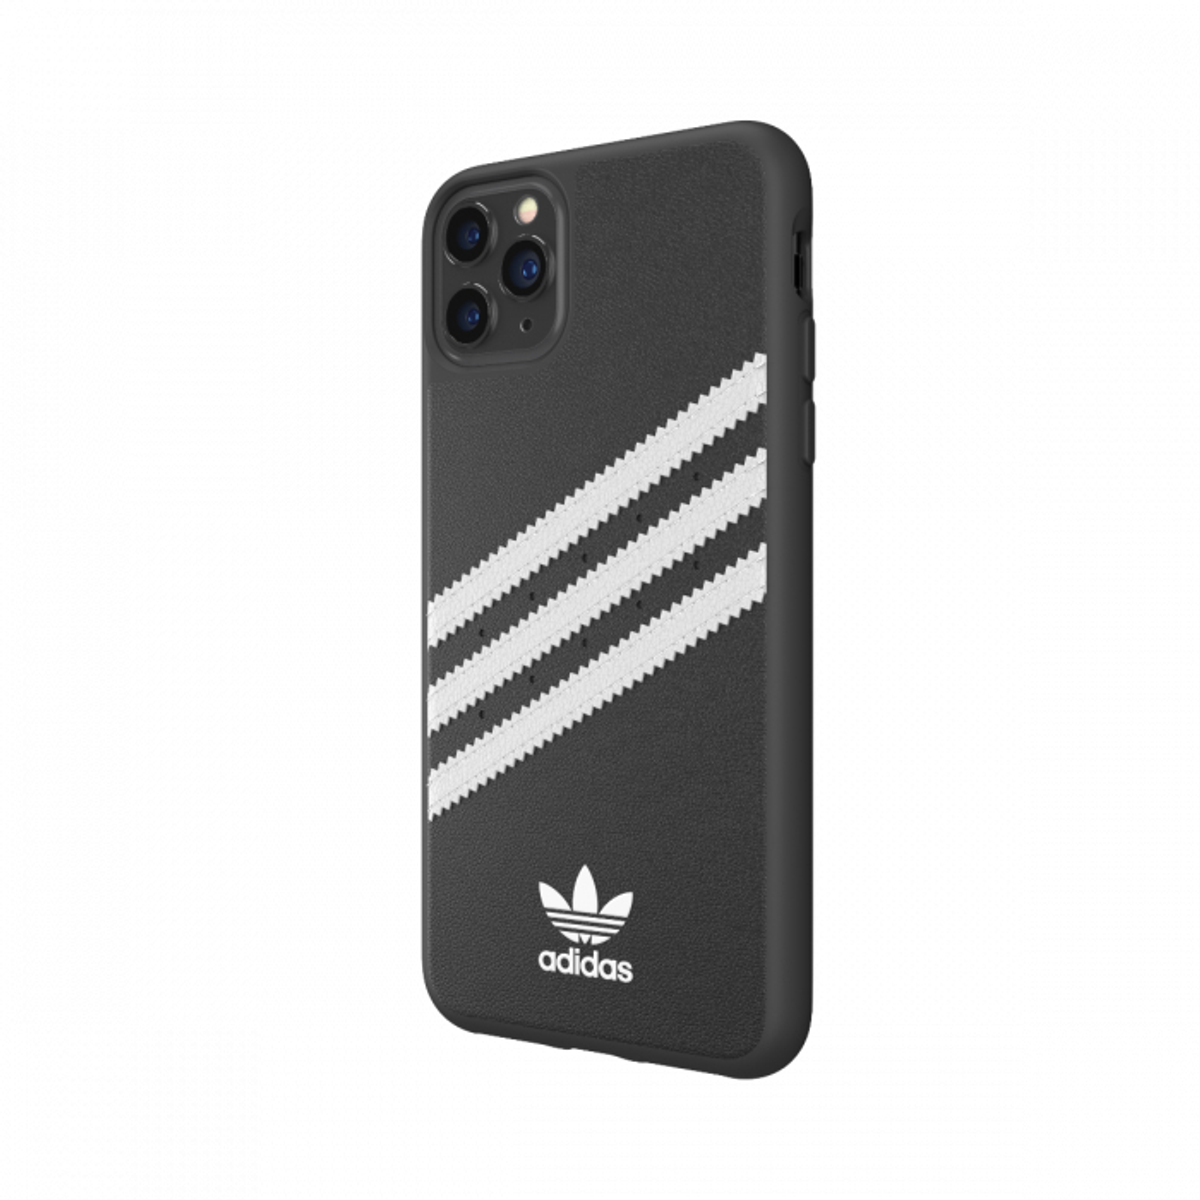 ADIDAS Moulded Case PU, 11 MAX, IPHONE Bookcover, BLACK APPLE, PRO